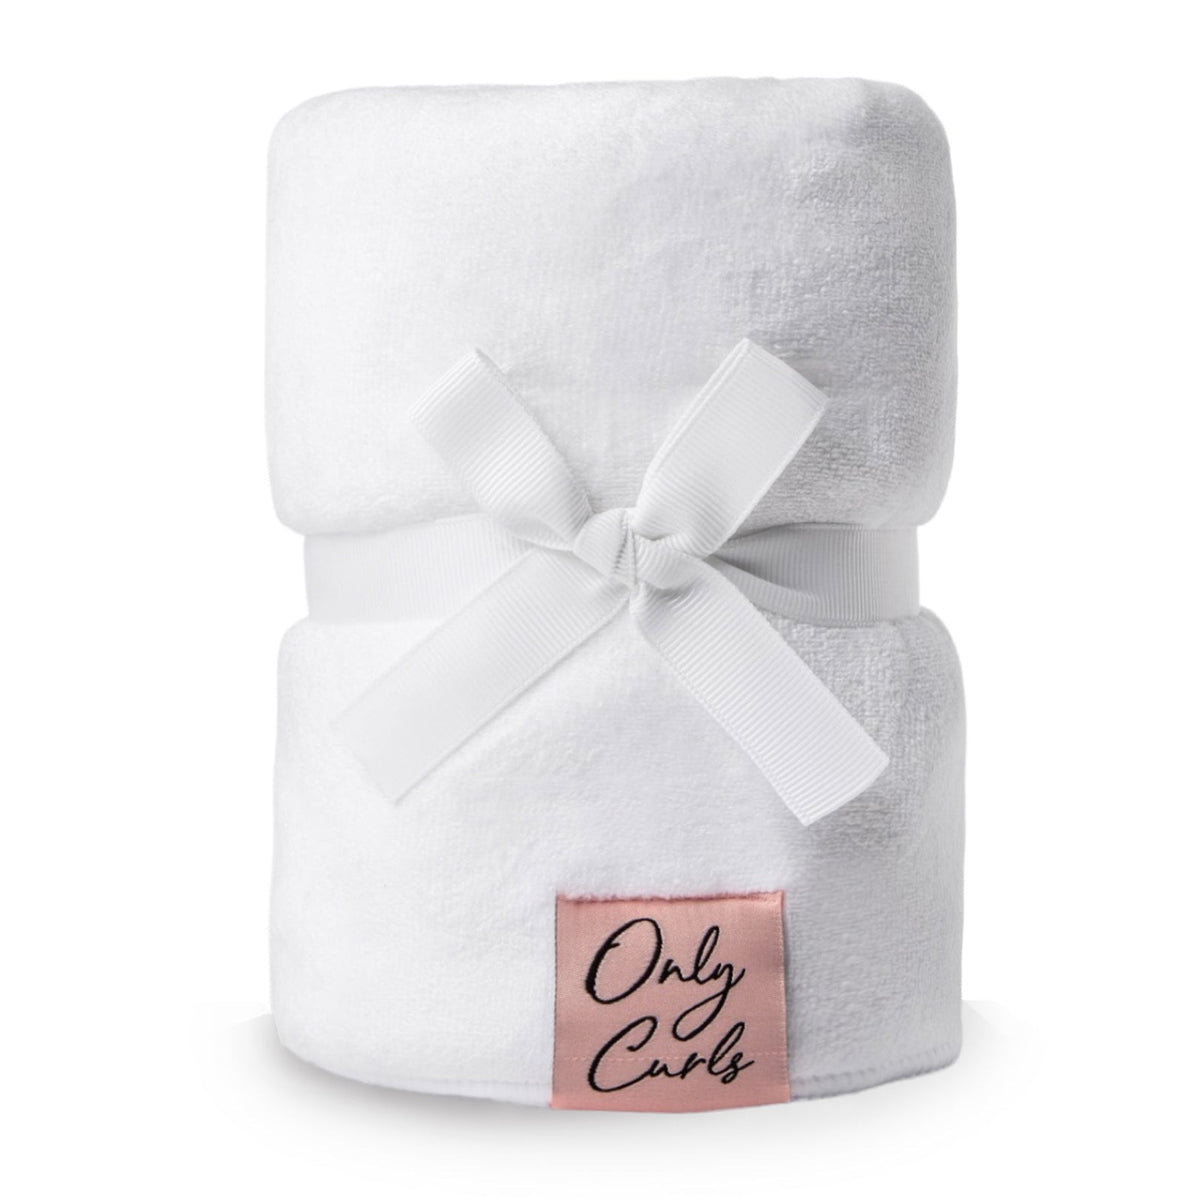 Only Curls Microfibre Hair Towel - White - Only Curls